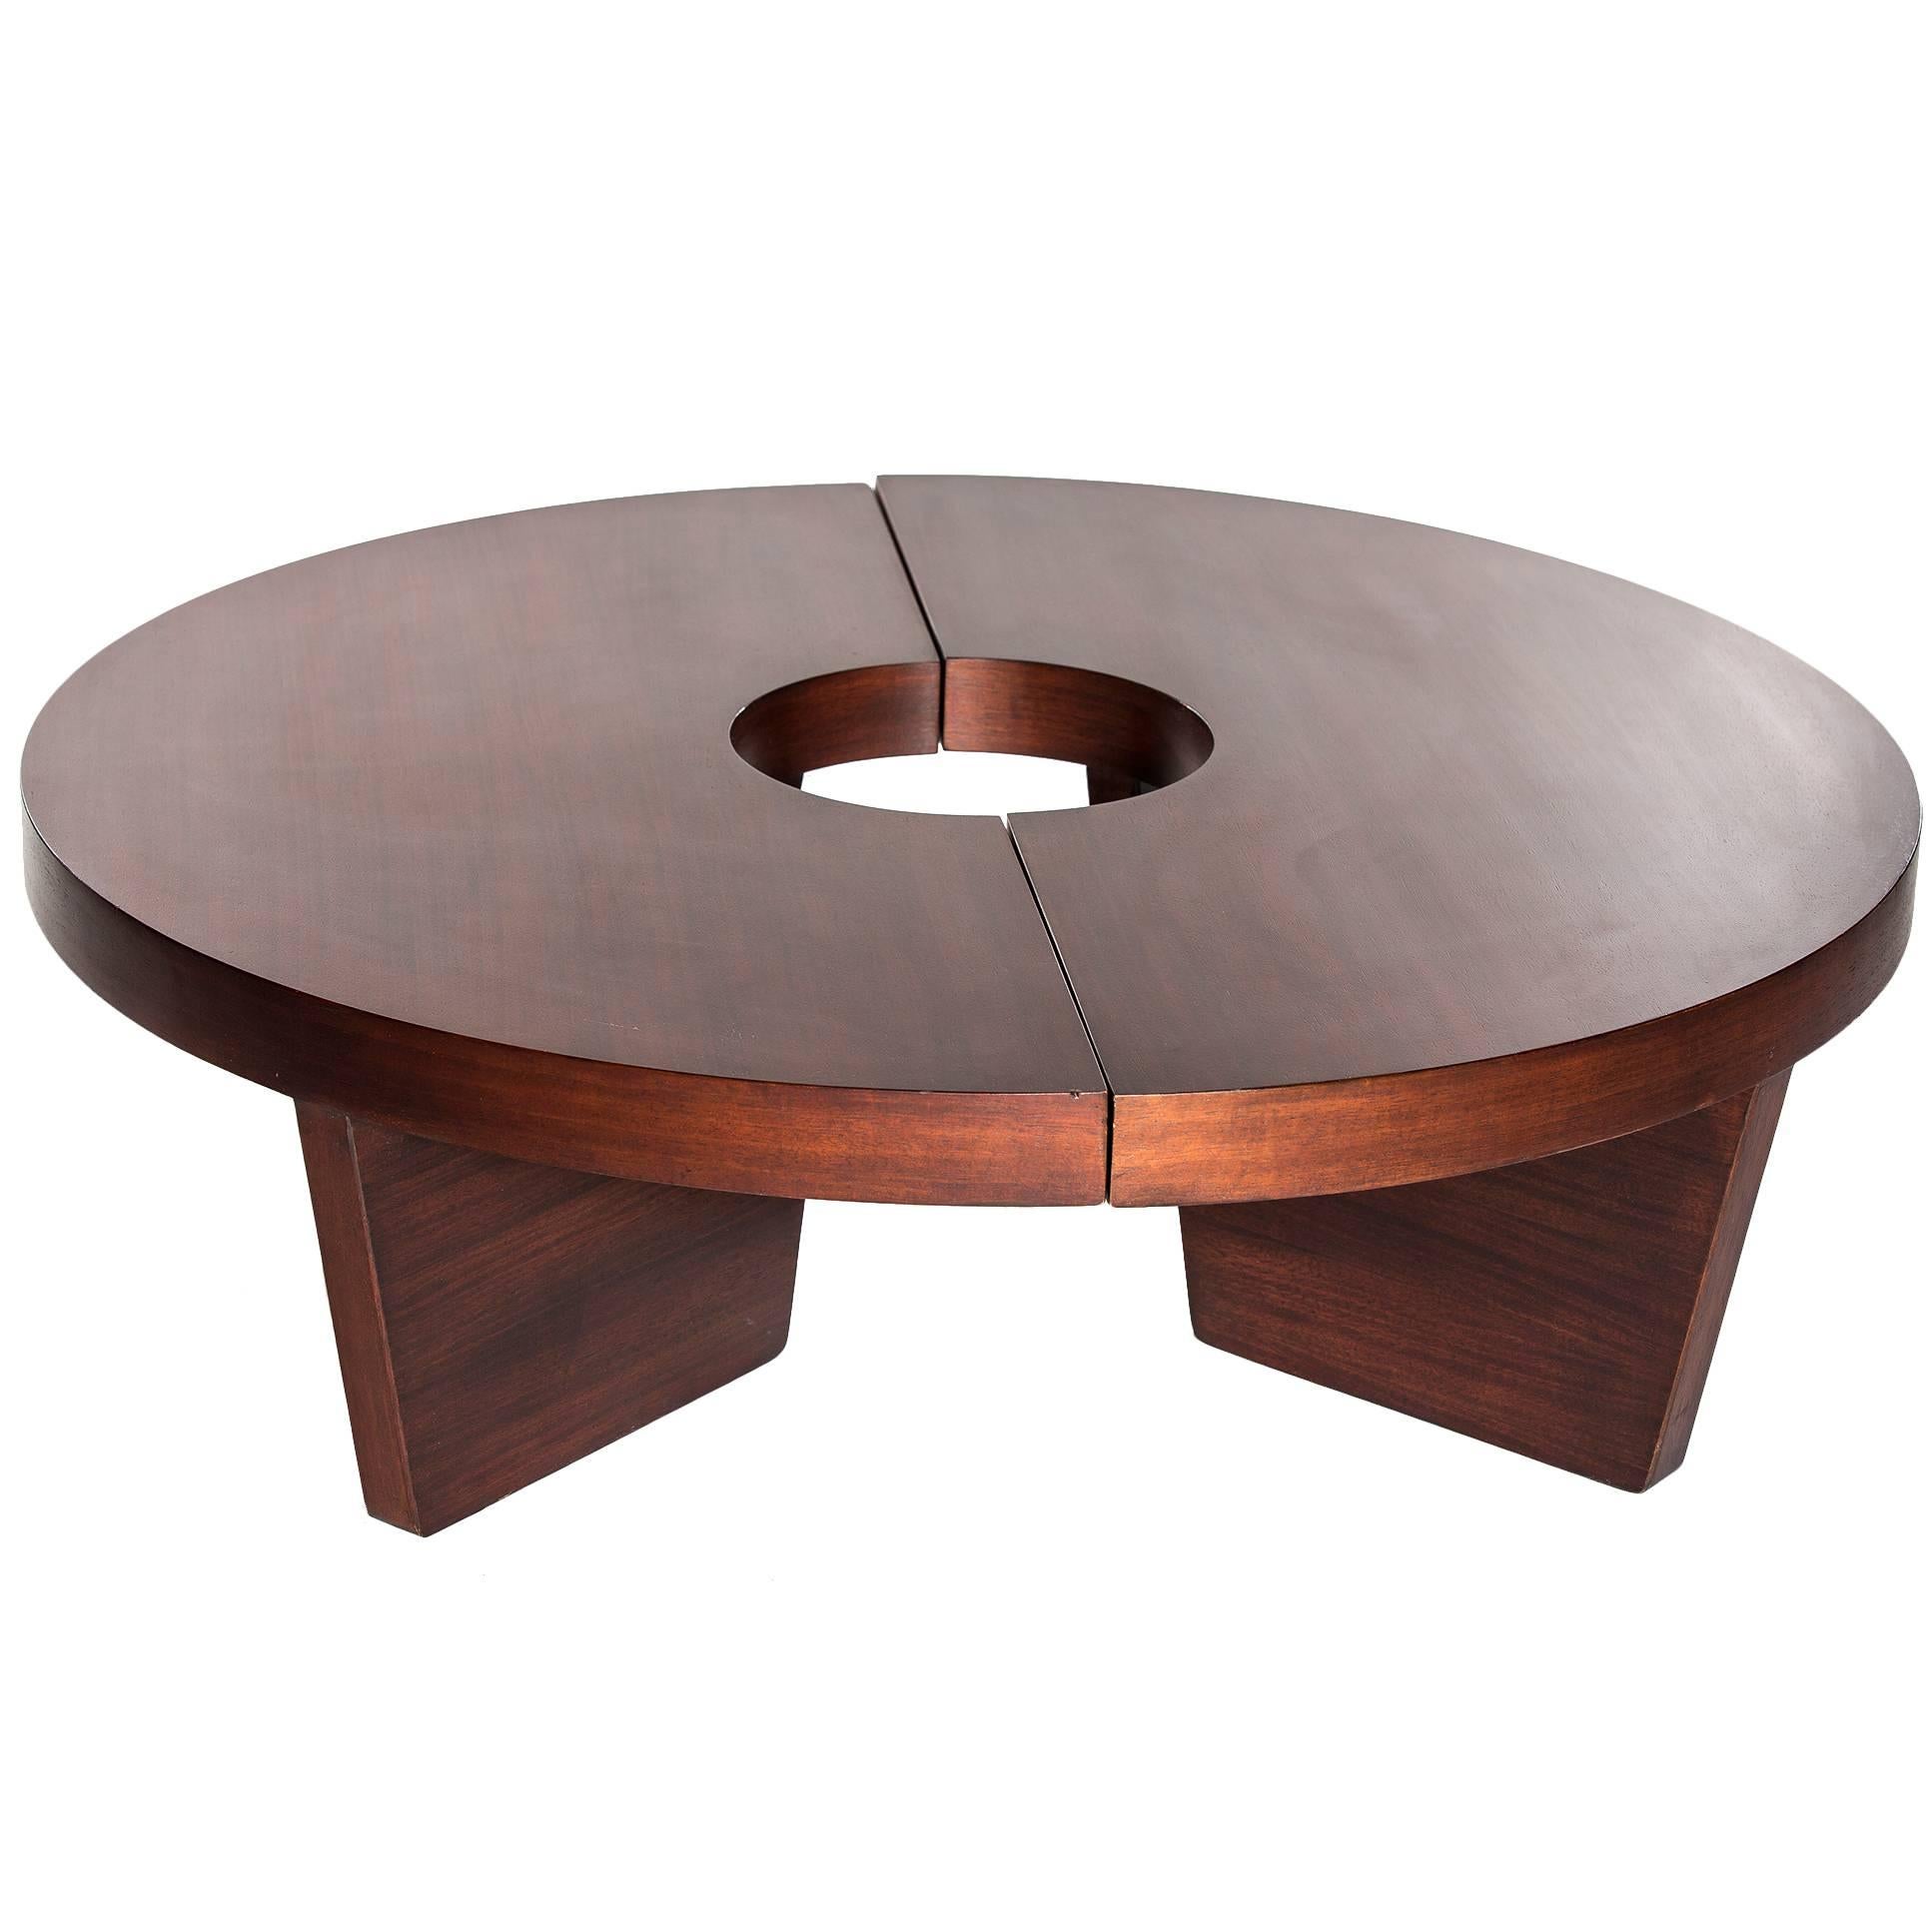 Harvey Probber, Nuclear Coffee Table, 1940s For Sale